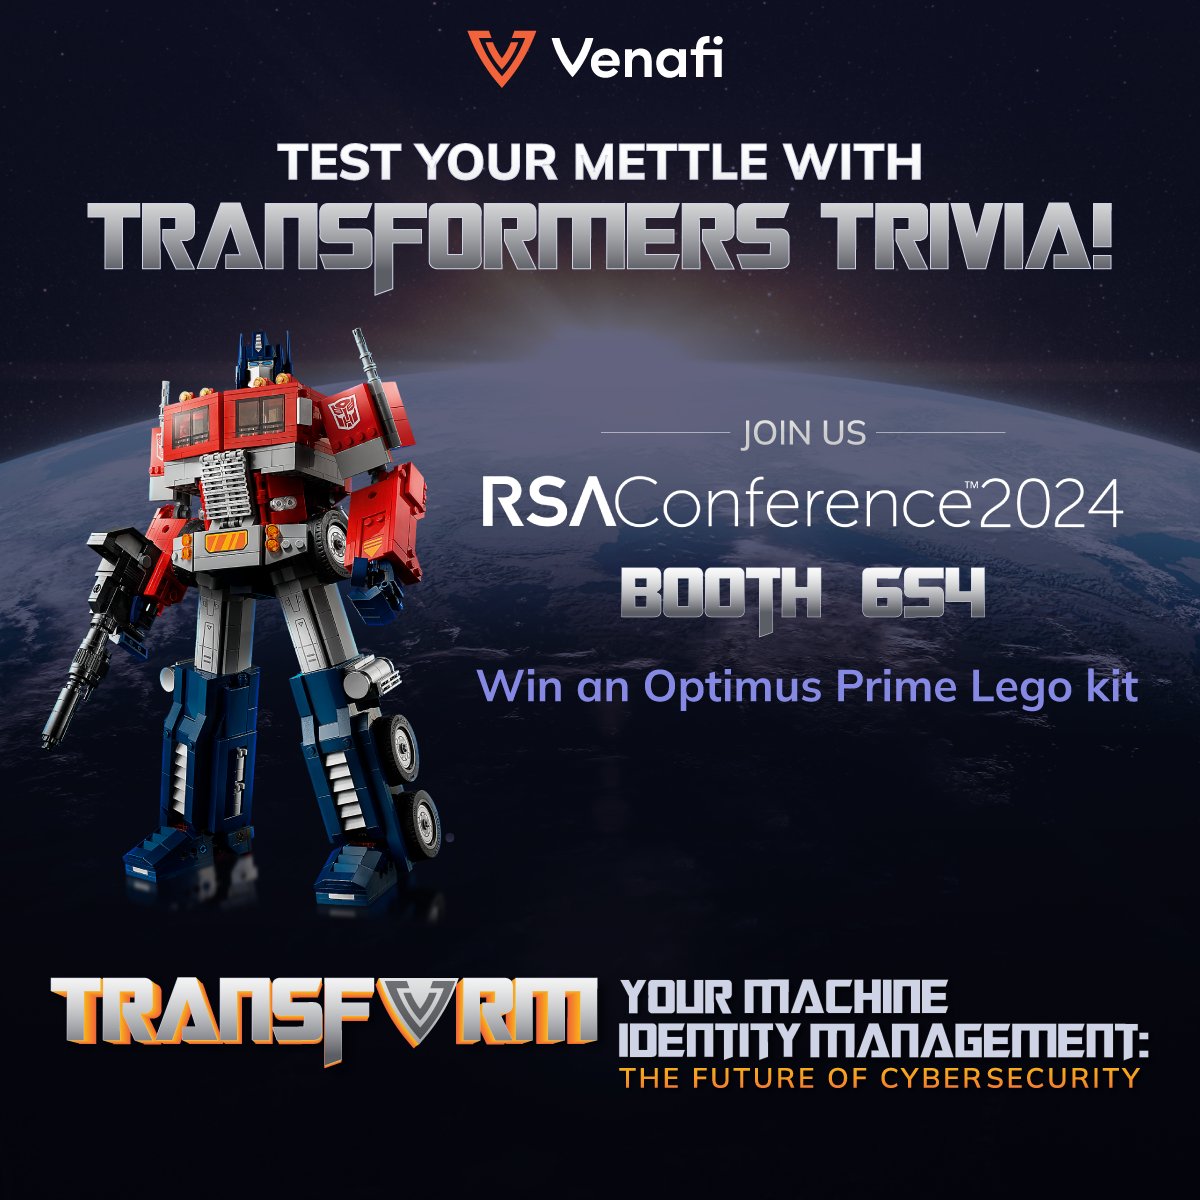 Ready to prove you're a Transformer movie buff? Play the Transformers Trivia Contest at Booth #654! Test your knowledge and be entered to win an awesome prize! Let's see who knows their Autobots from their Decepticons and their cybersecurity facts! #RSAC #TransformWithVenafi